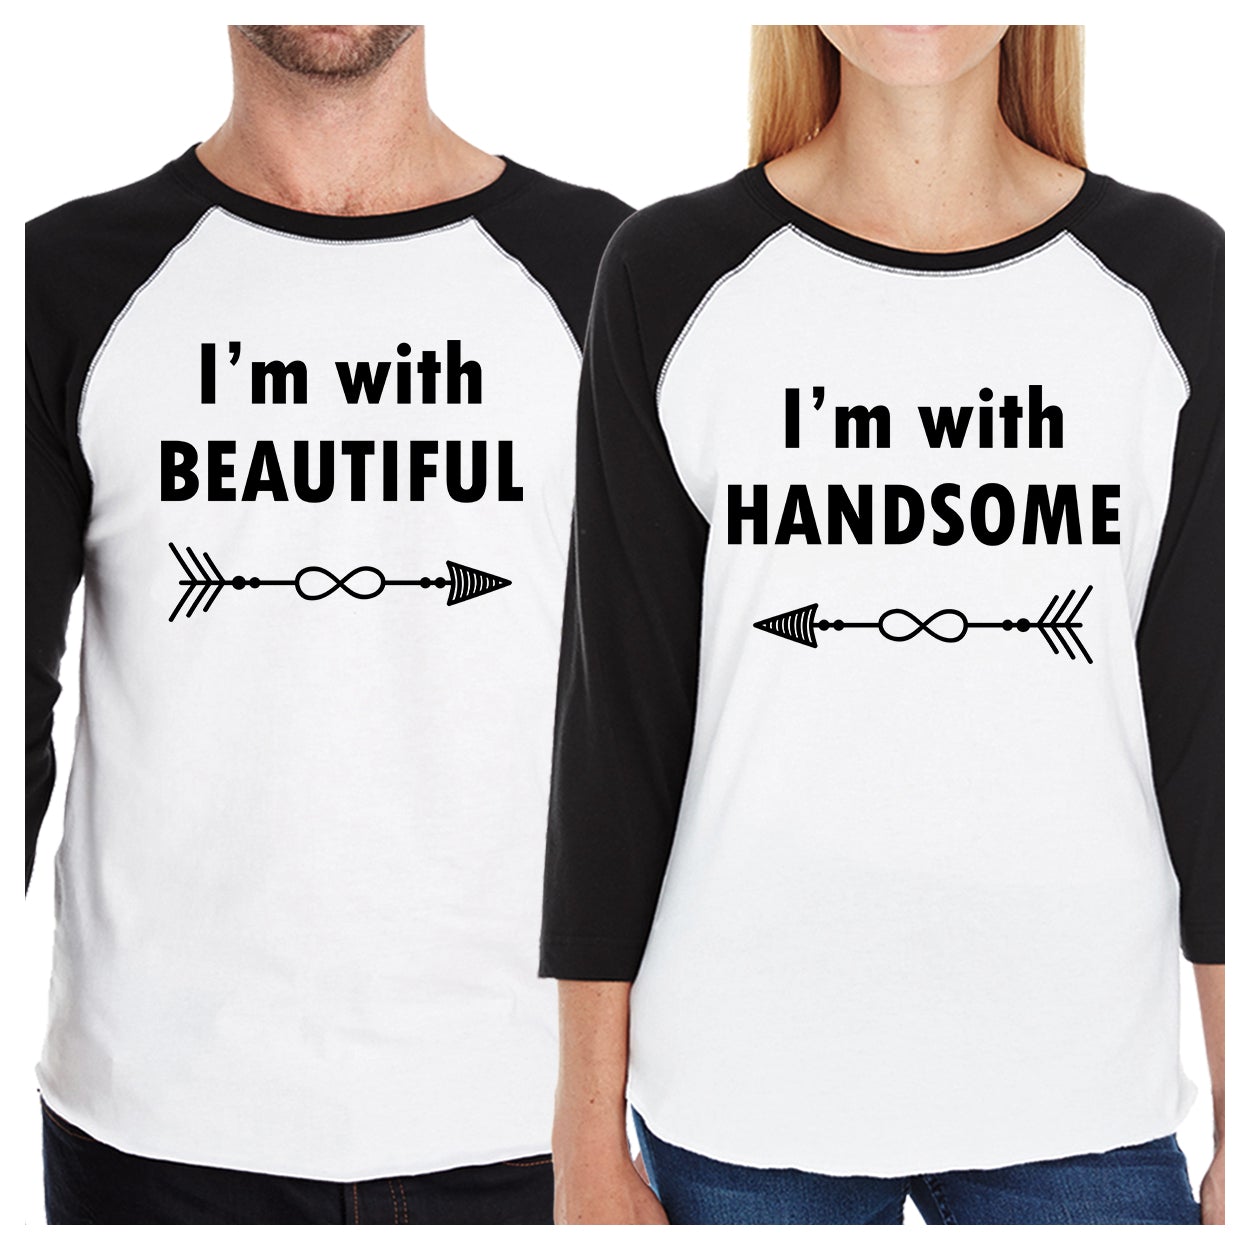 I'm With Beautiful And Handsome Matching Couple Black And White Baseball Shirts